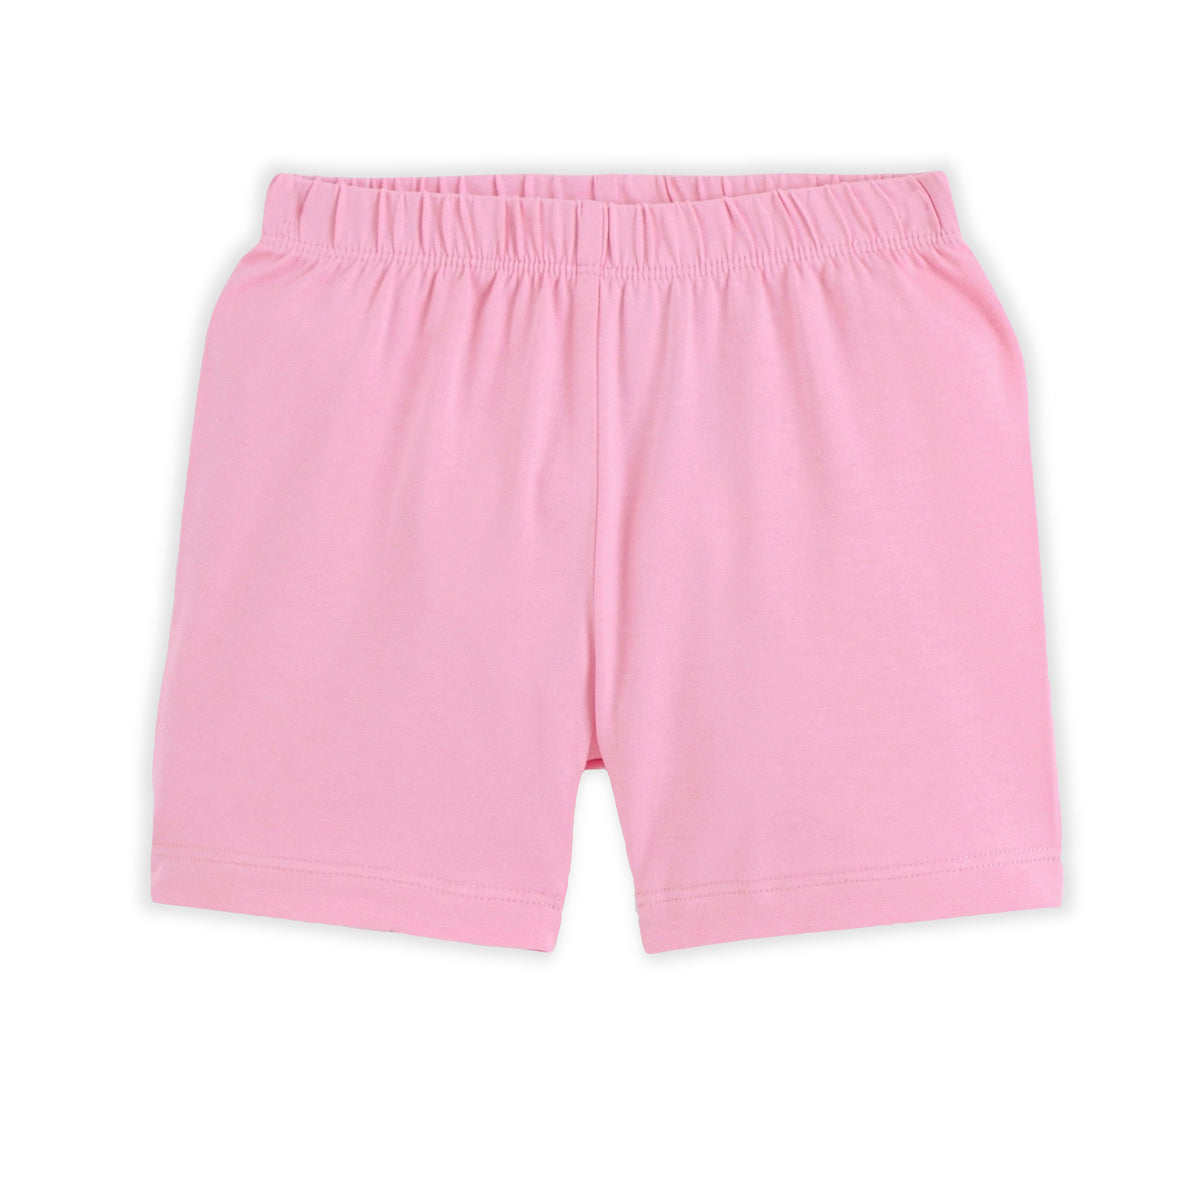 Kids Pink Solid Cotton Shorts